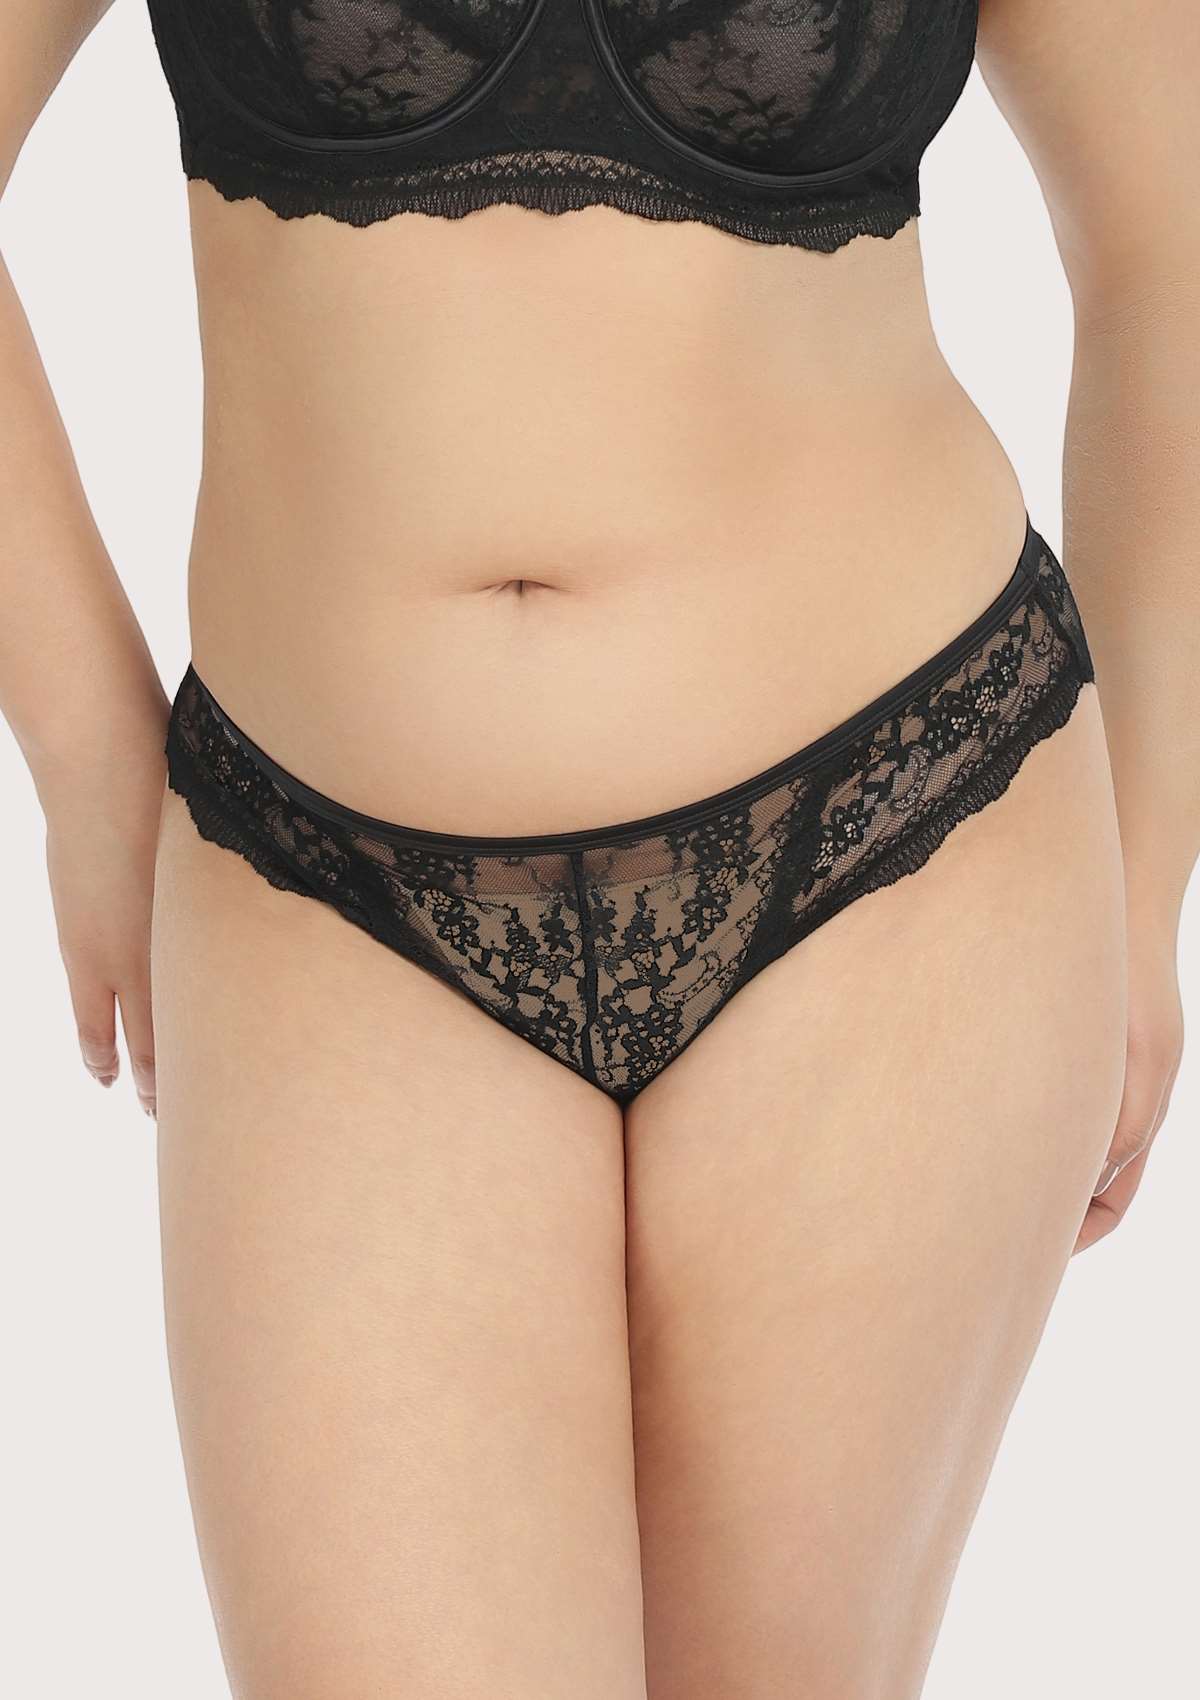 HSIA Floral Lace Bridal Cheeky Underwear: Delicate, Airy, And Comfy - Black / L